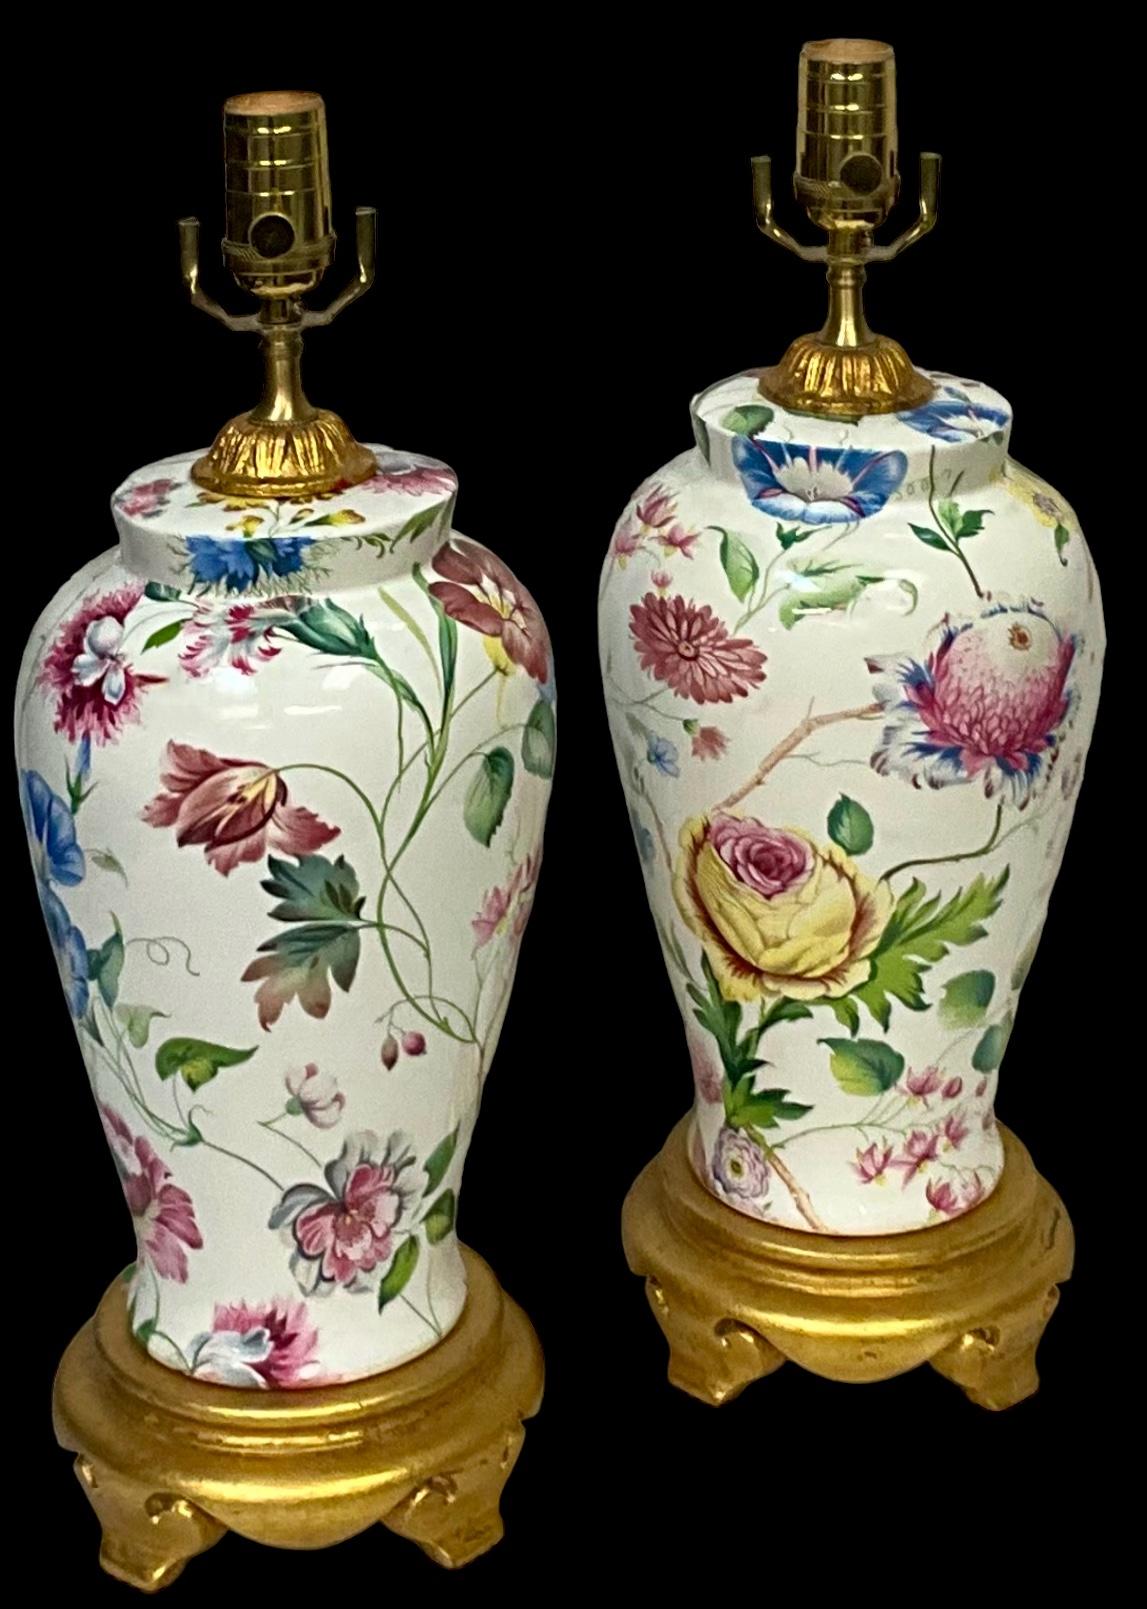 Porcelain Ginger Jar Form Floral / Botanical Table Lamps Att. Chelsea House-Pair In Good Condition For Sale In Kennesaw, GA